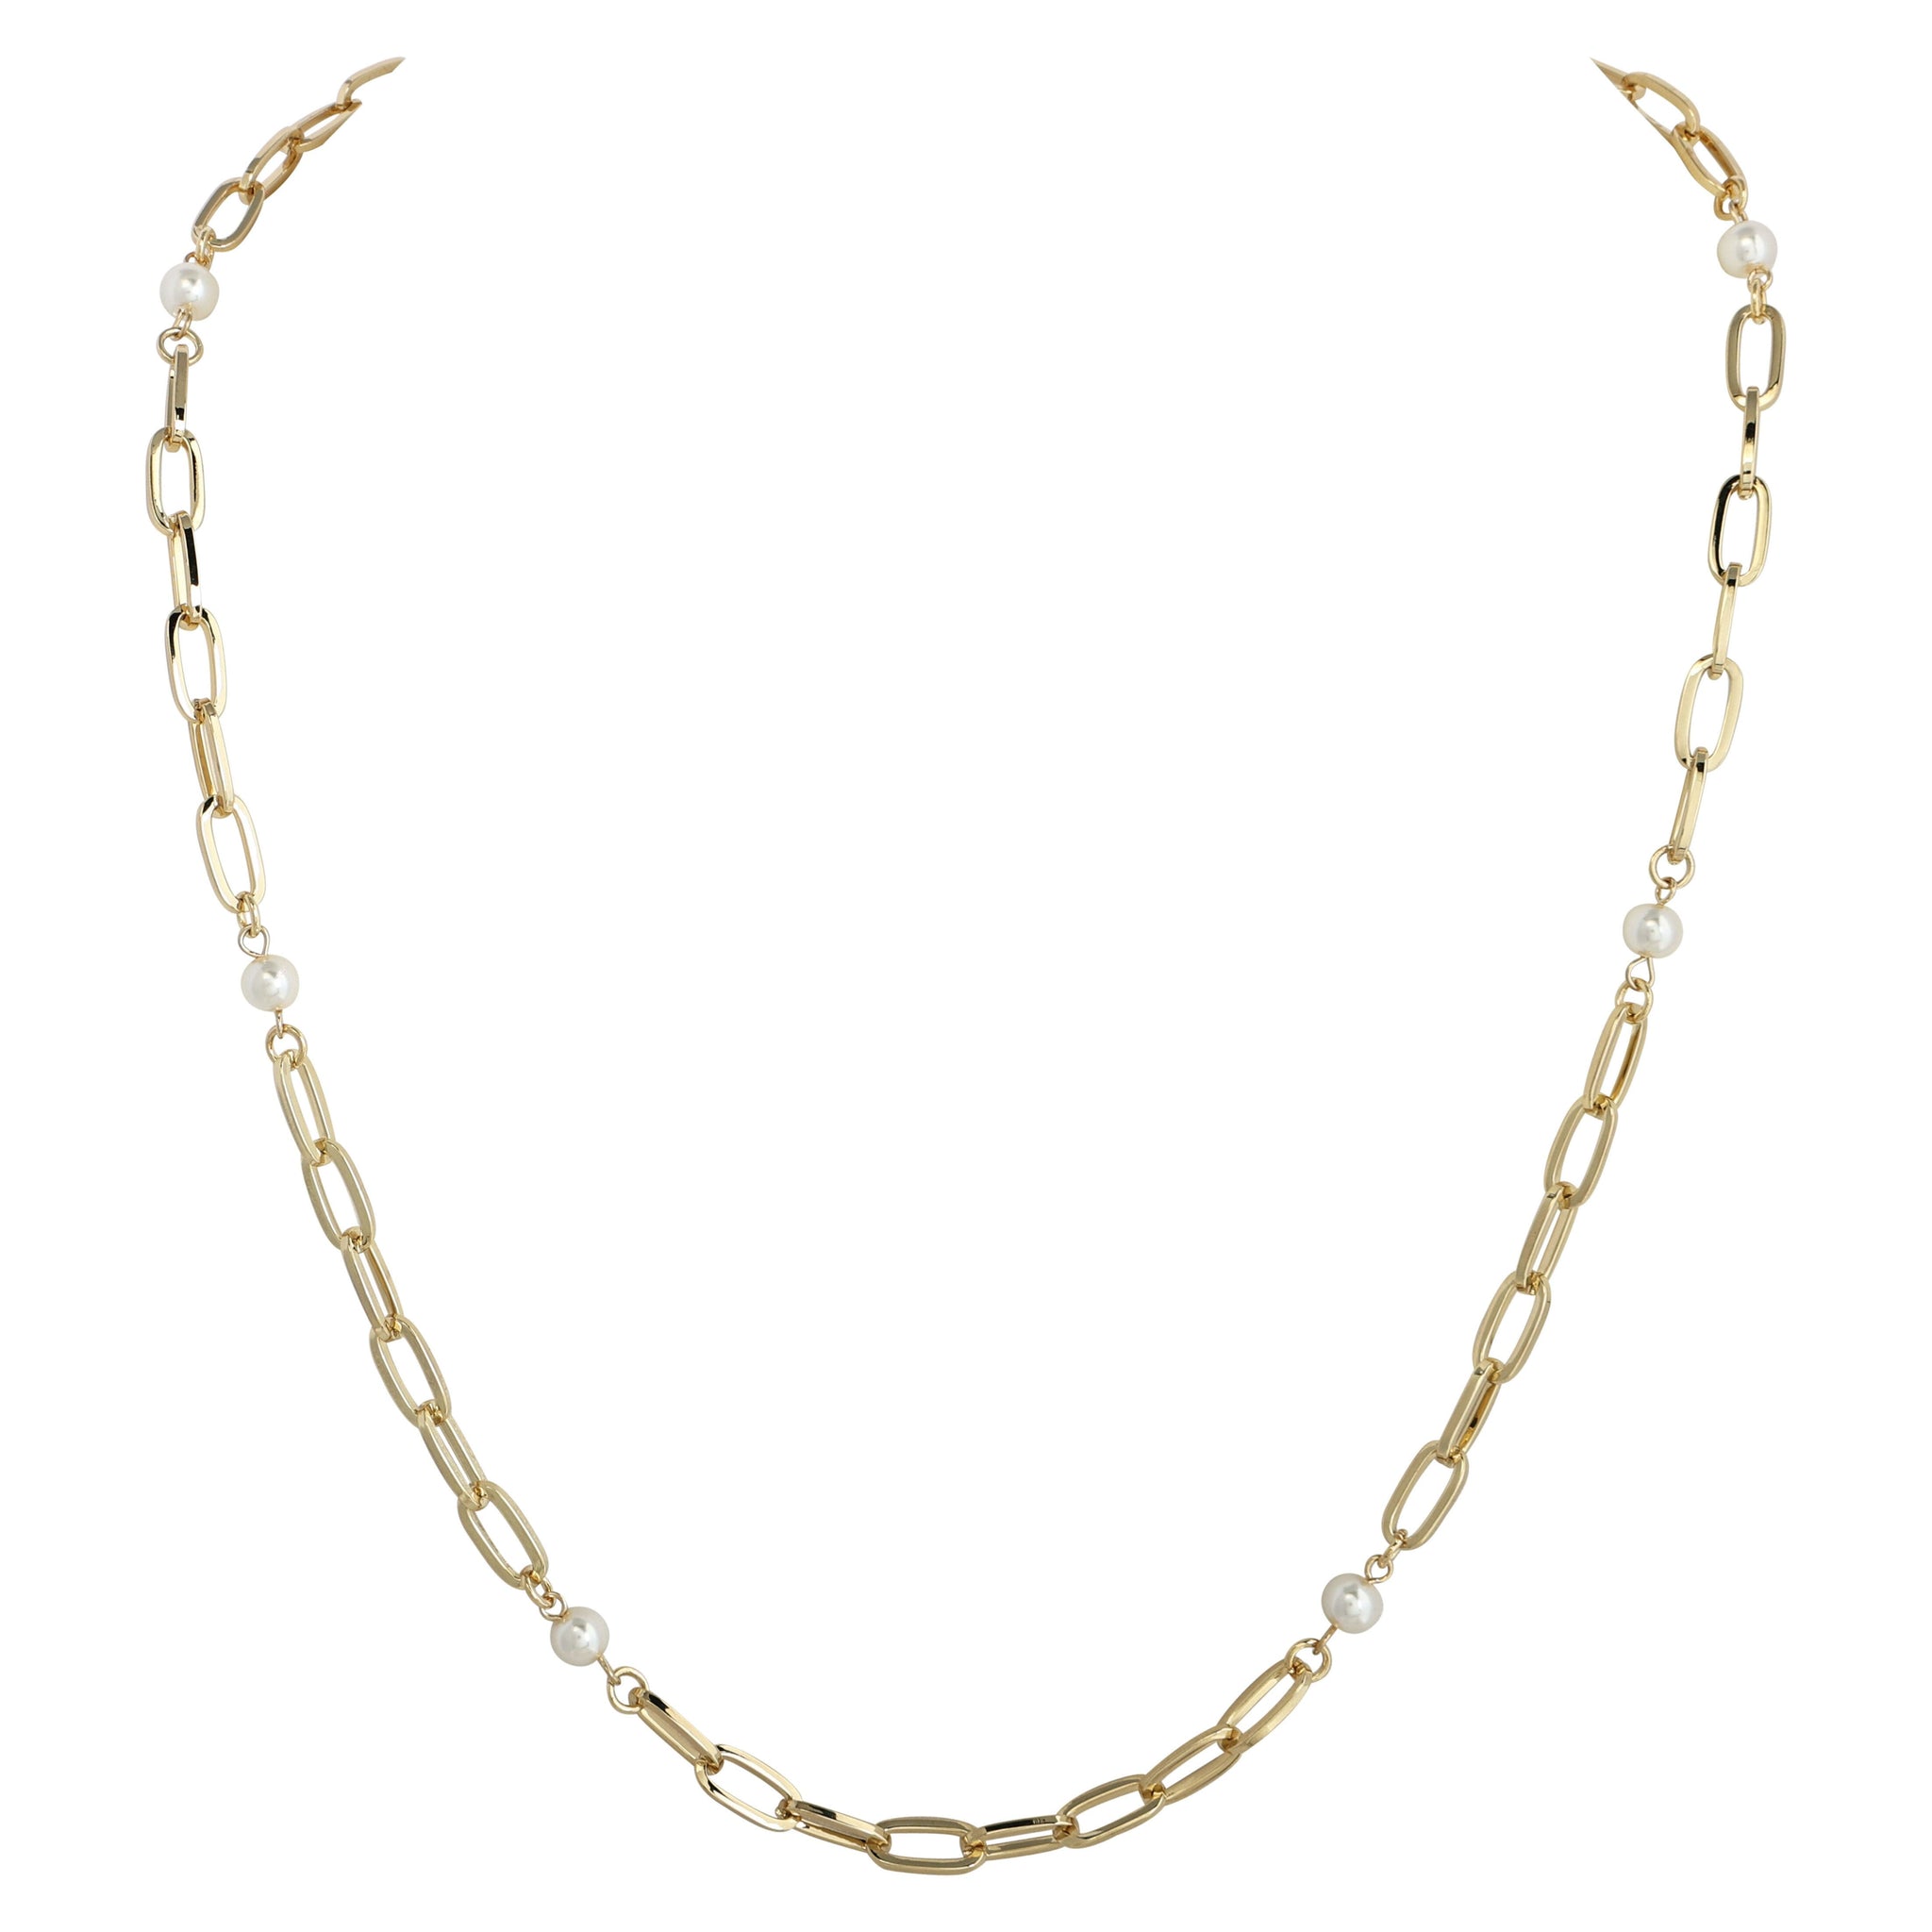 CREAM PEARL GOLD CHAIN LINK NECKLACE necklace Merx Gold 